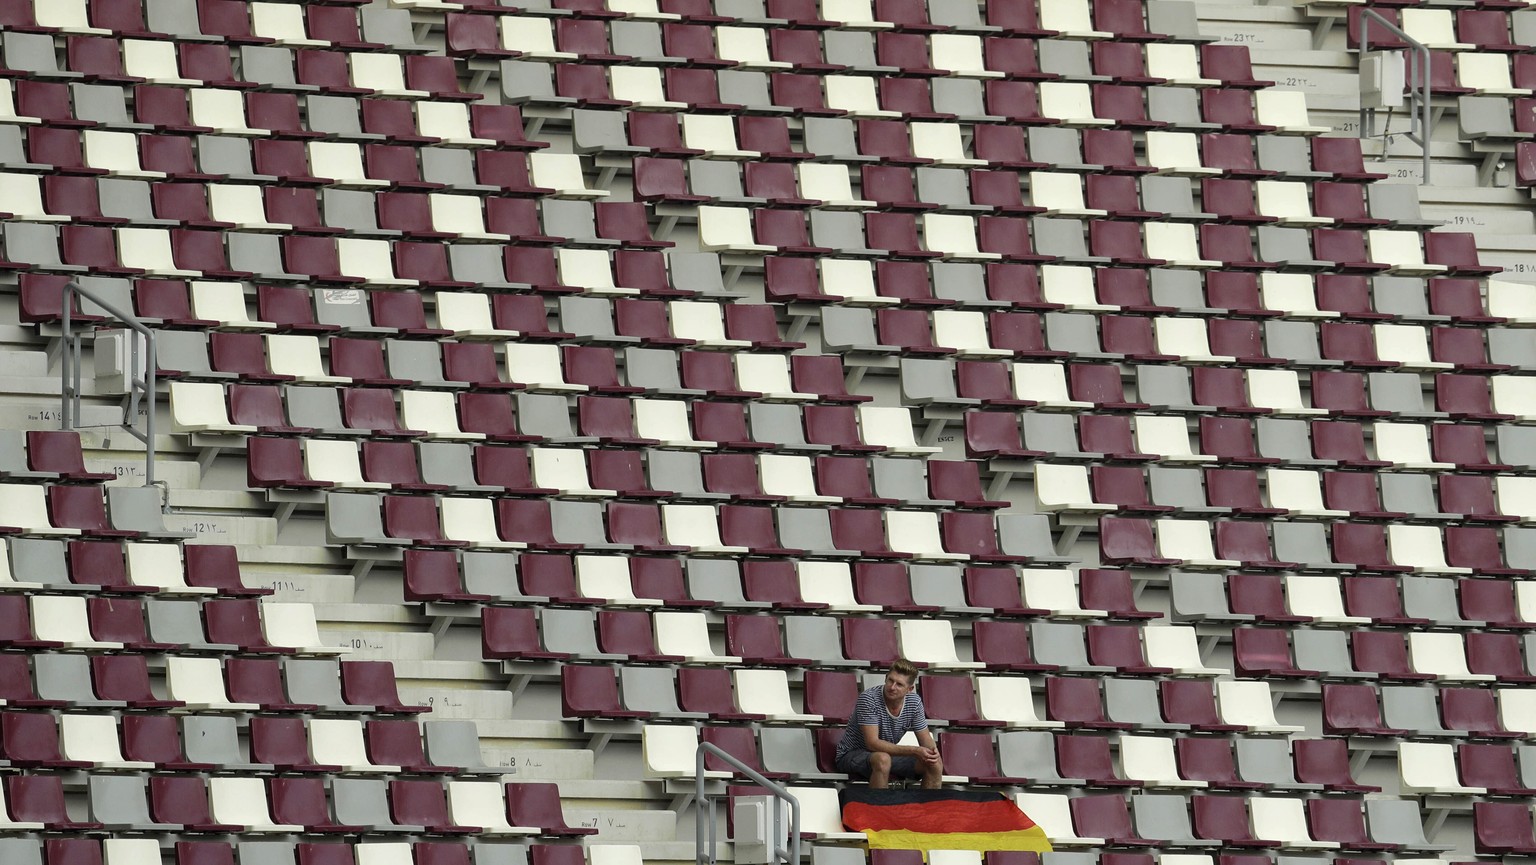 A lone German supporter sits in the stands at the World Athletics Championships in Doha, Qatar, Monday, Sept. 30, 2019. (AP Photo/Nariman El-Mofty)